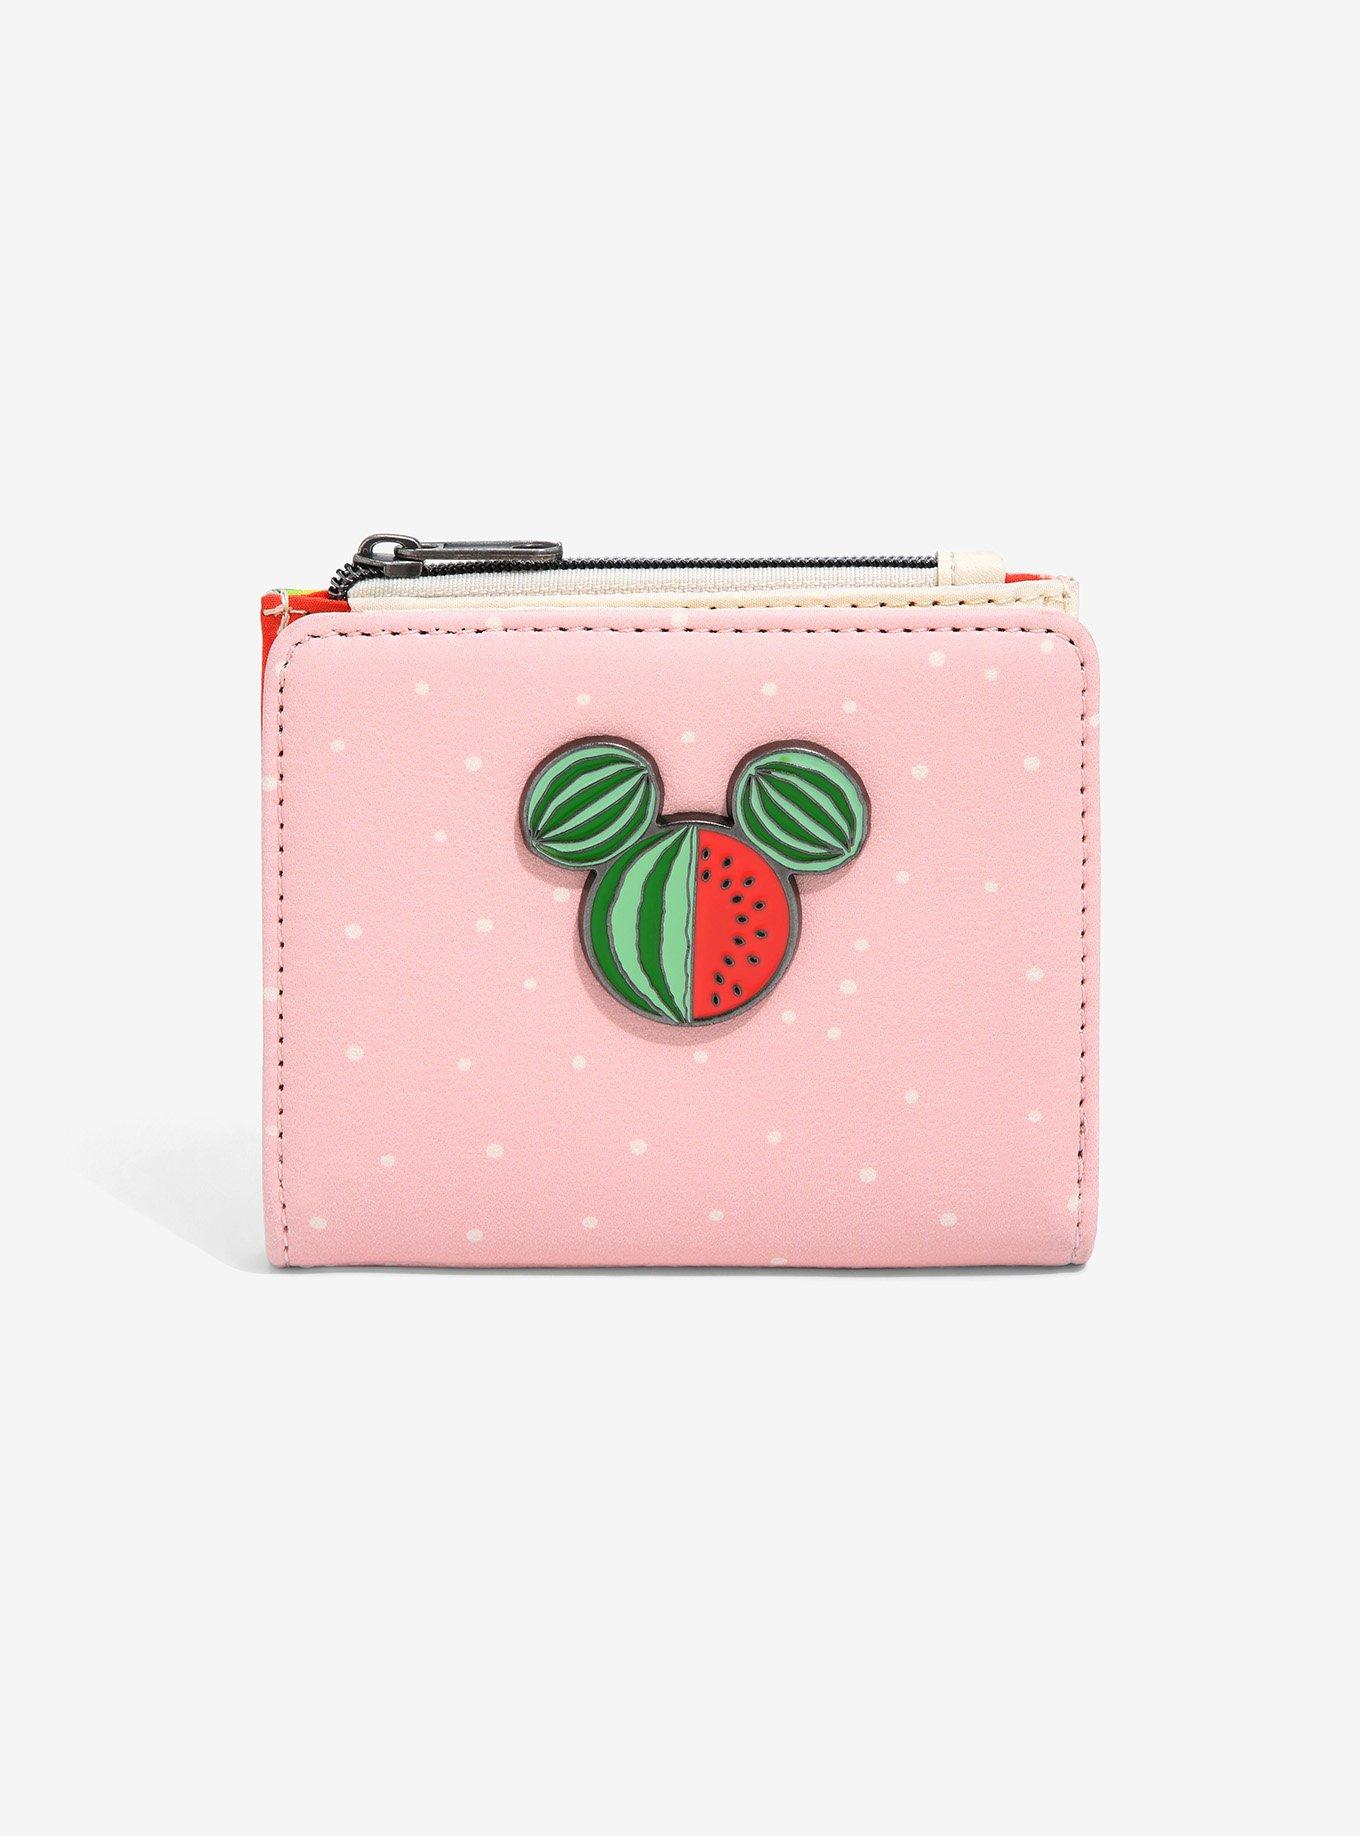 Loungefly Disney Mickey Mouse Fruit Mini Wallet, , hi-res